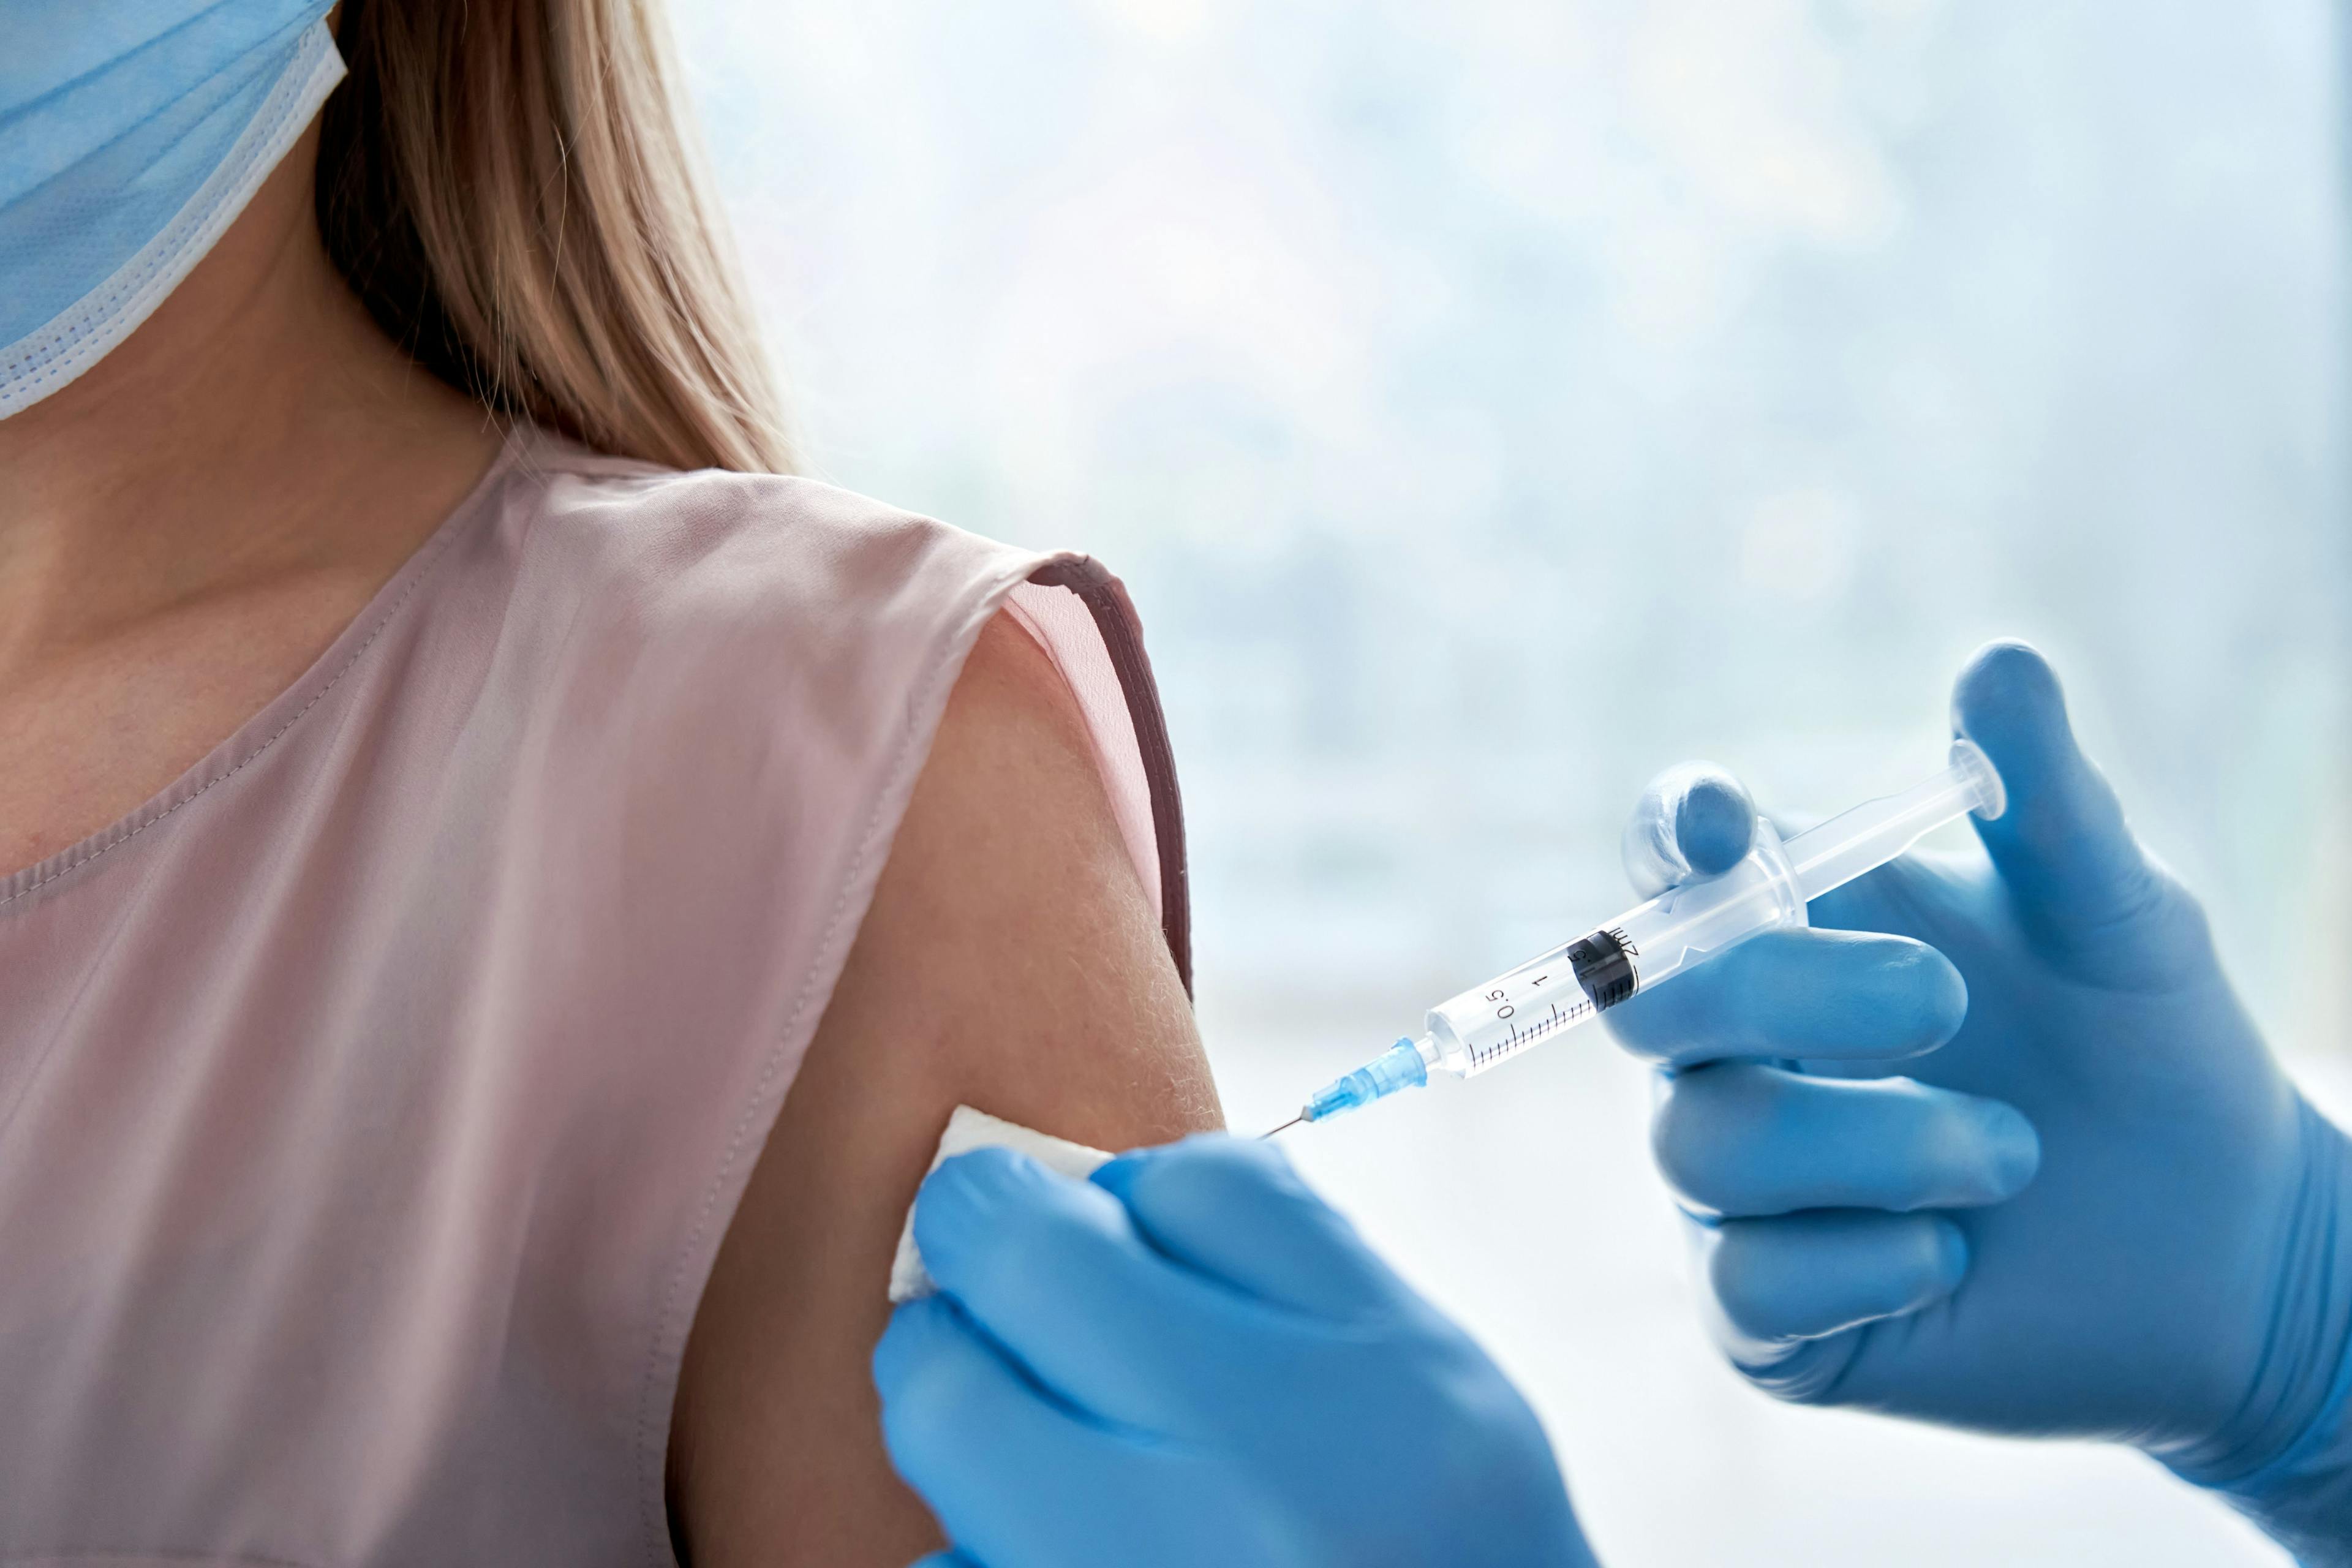 Is There Liability if I Vaccinate My Staff and Something Goes Wrong?